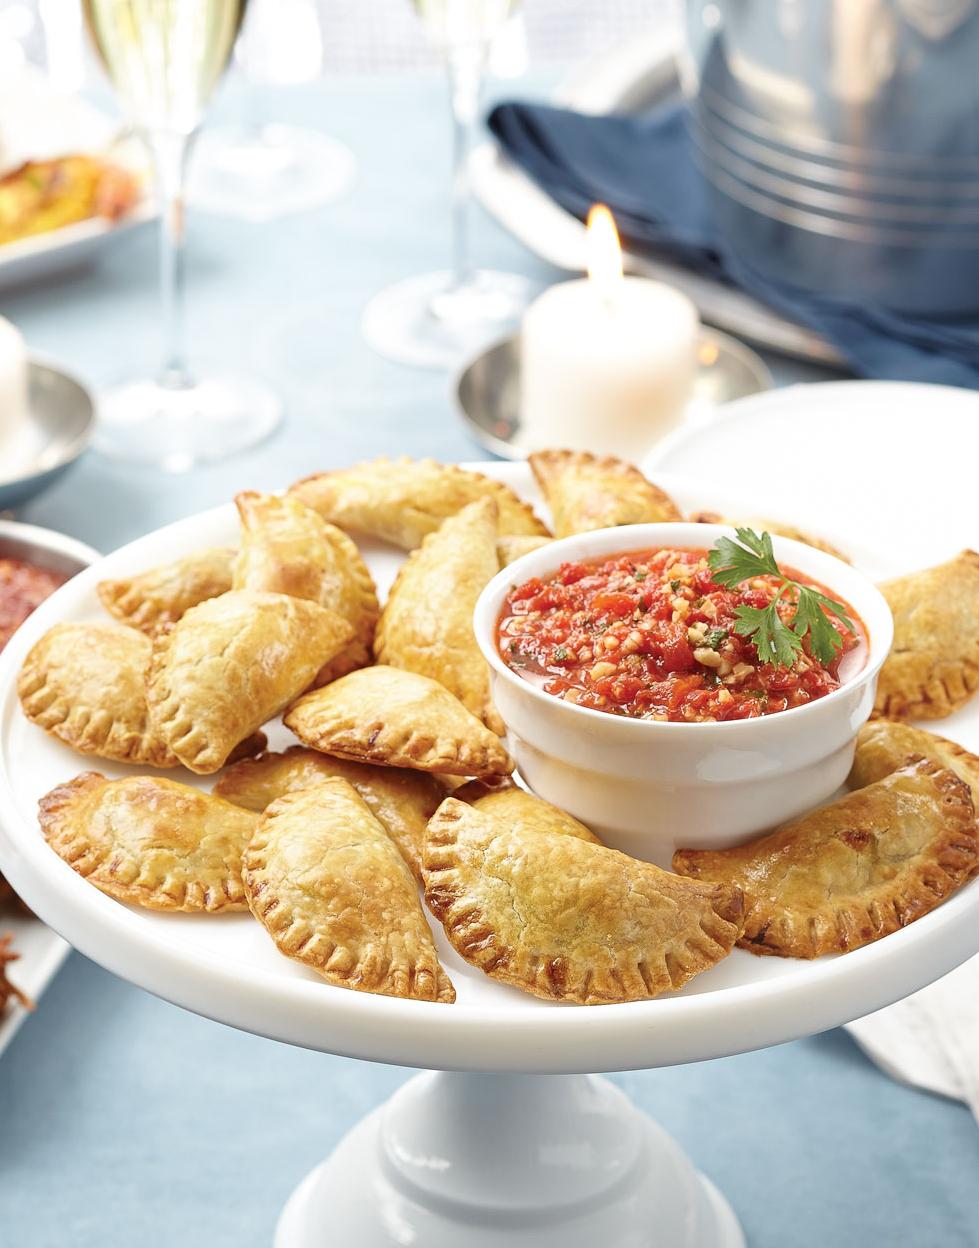  One bite of these delicious empanadas will transport you to the vibrant street markets of Argentina.